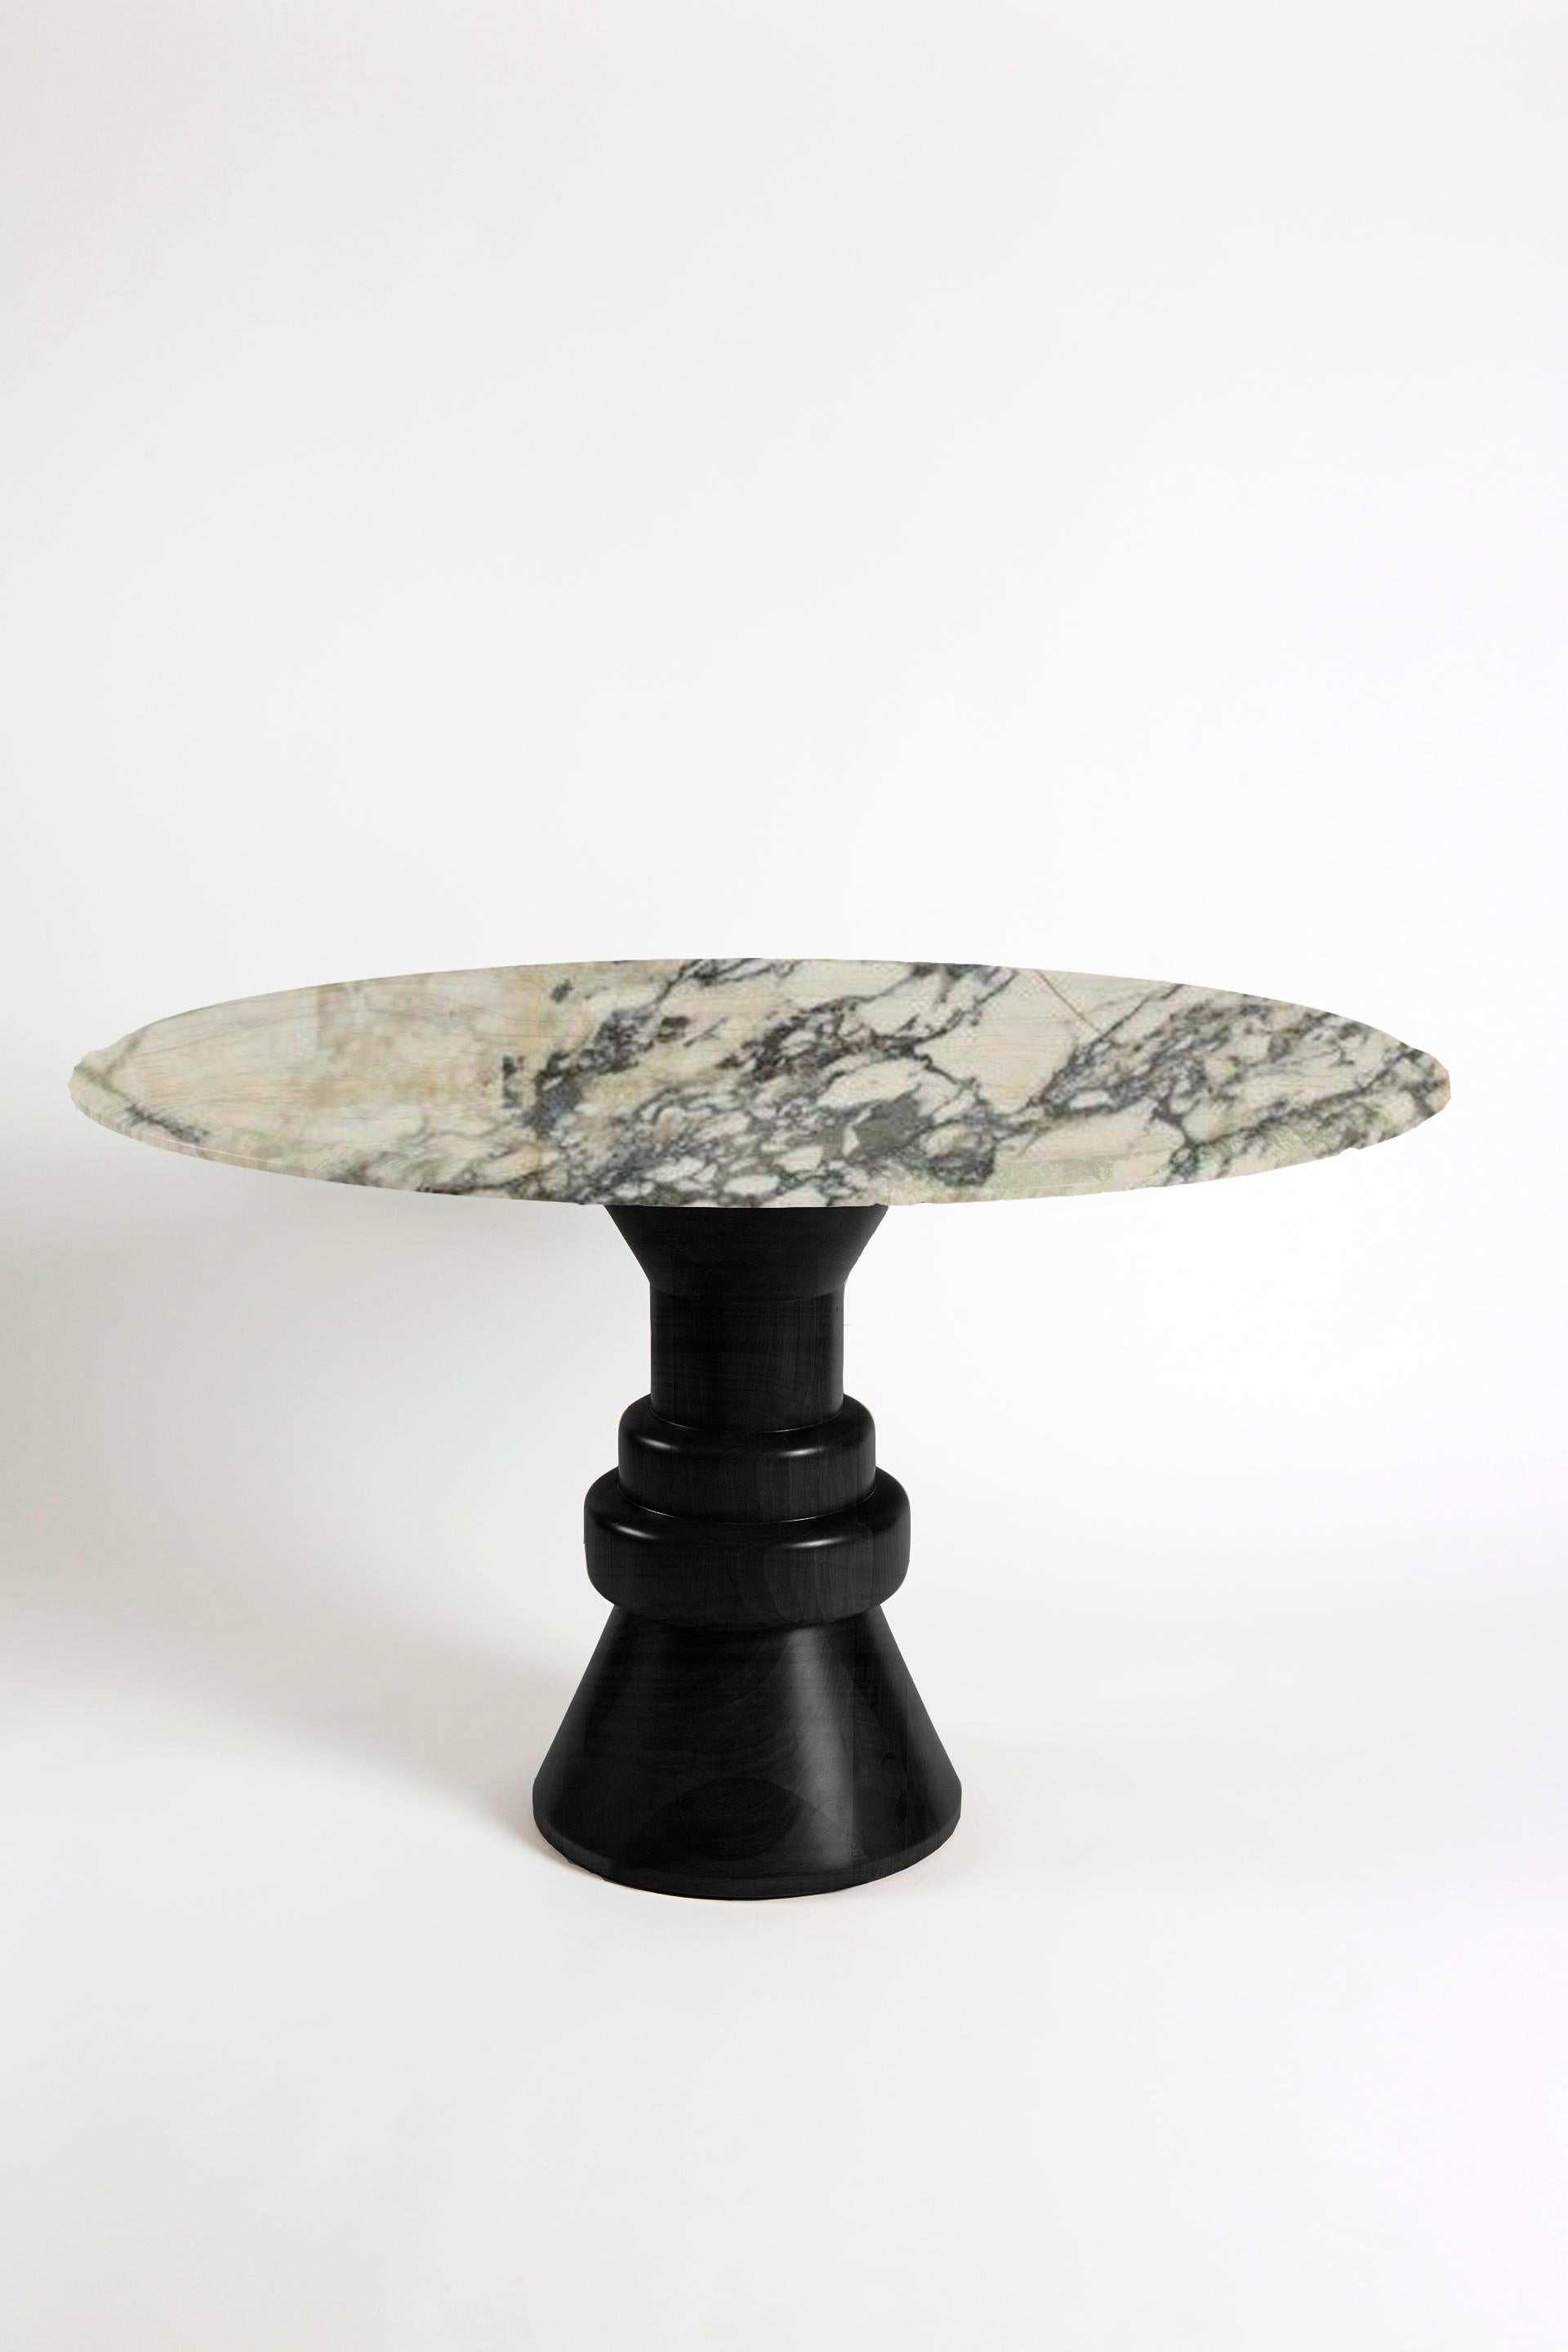 21st Century Red Marble Round Dining Table with Sculptural Black Wooden Base For Sale 2